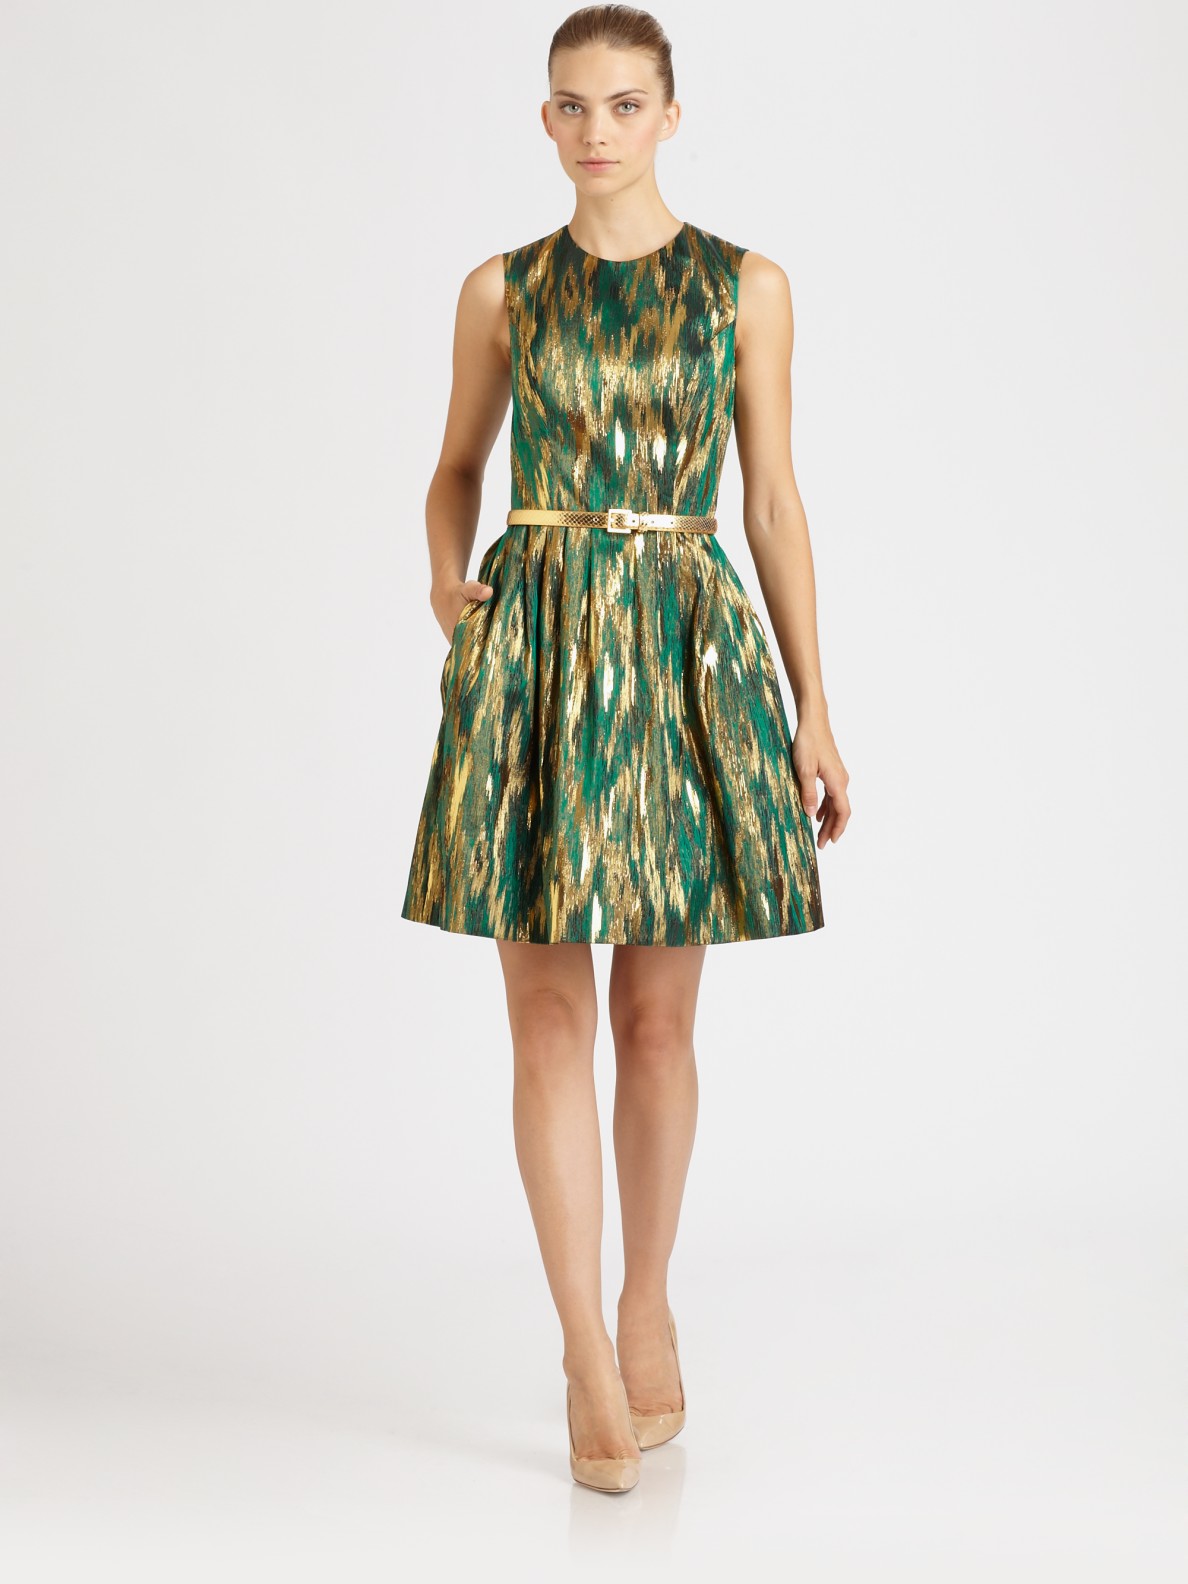 Lyst - Michael Kors Belted Jacquard Dress in Green